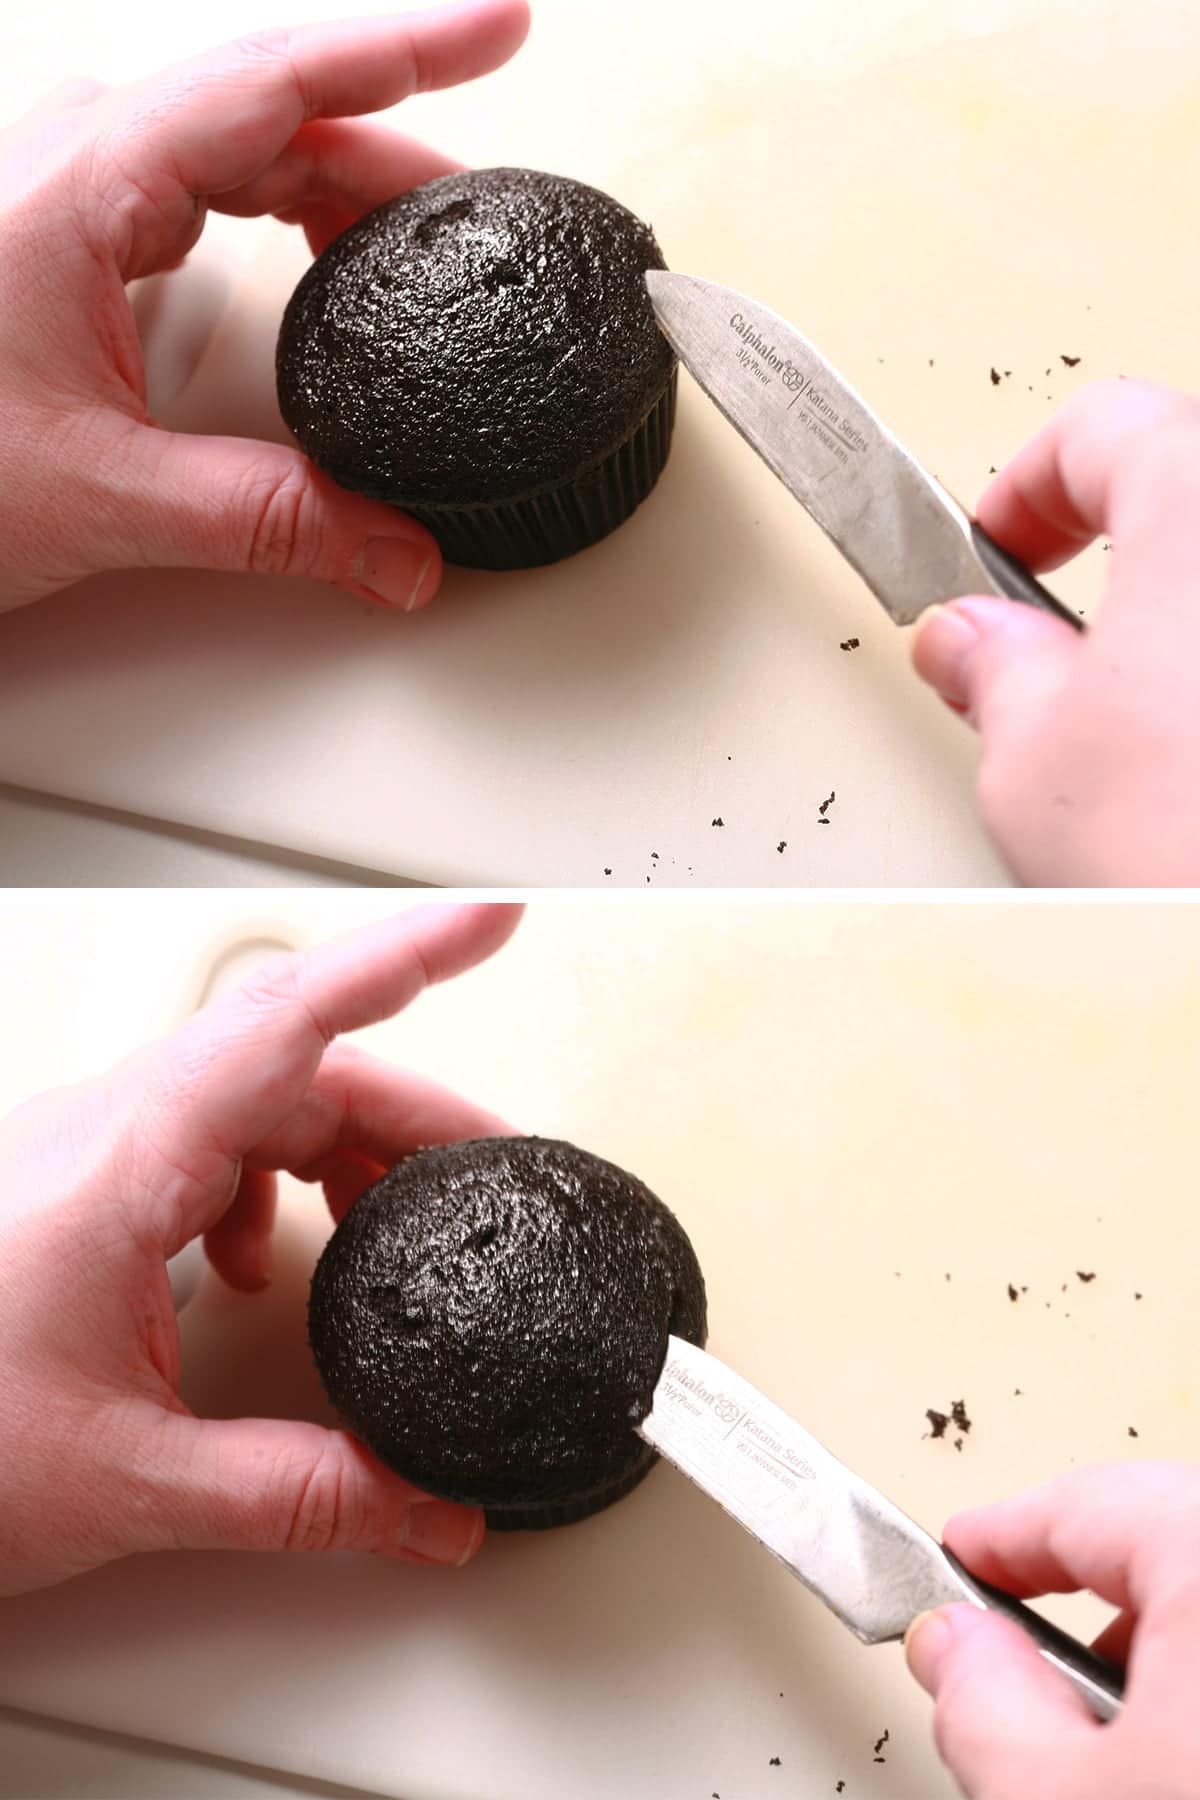 A two part compilation image showing the top being cut off of a black velvet cupcake.